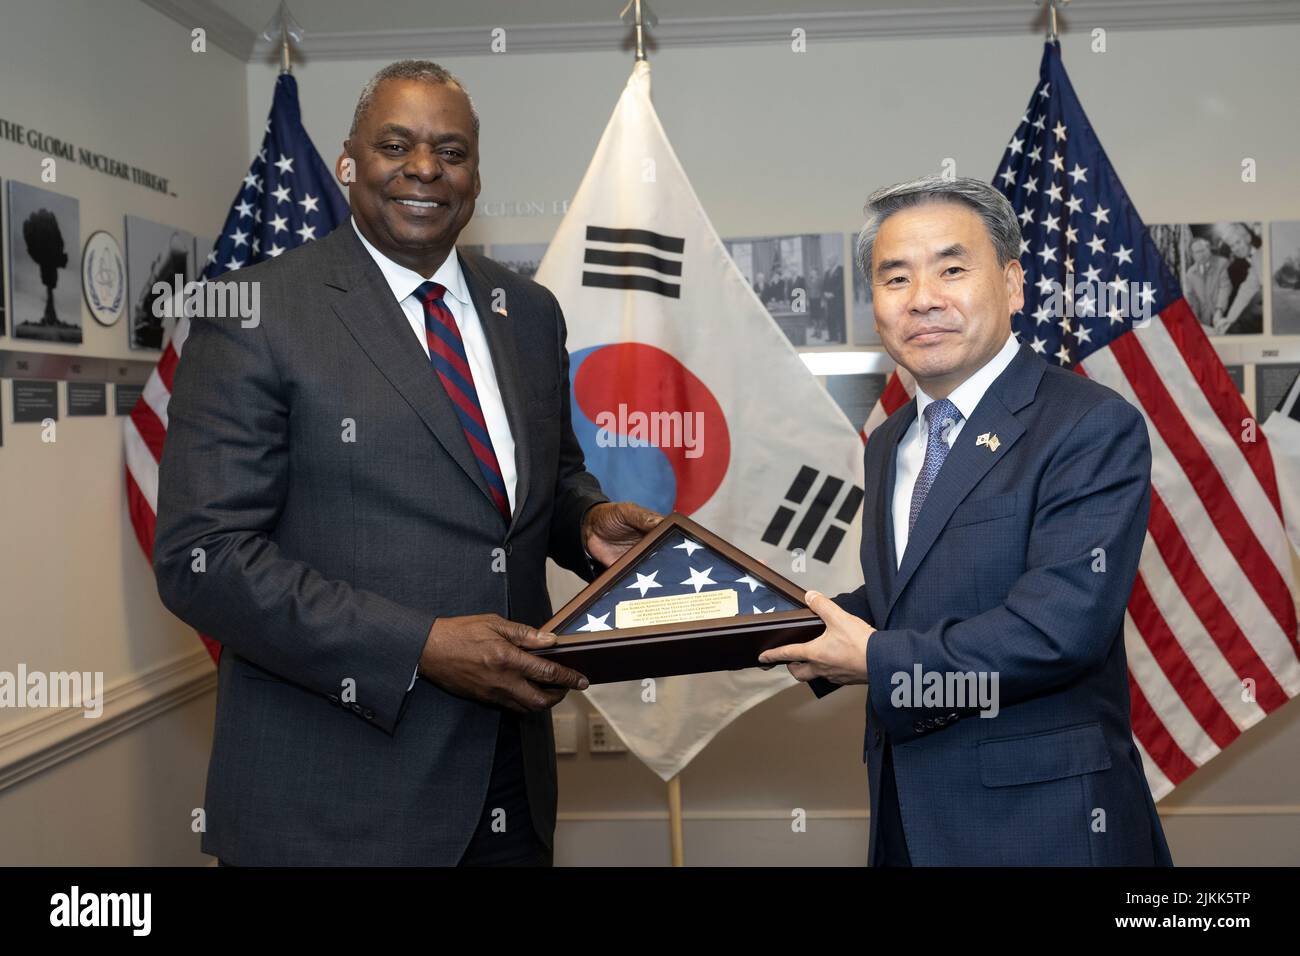 Arlington, United States of America. 29 July, 2022. U.S. Secretary of Defense Lloyd J. Austin III, presents a gift to South Korean Minister of National Defense Lee Jong-sup, right, before the state of bilateral talks at the Pentagon, July 29, 2022 in Arlington, Virginia.  Credit: Lisa Ferdinando/DOD/Alamy Live News Stock Photo